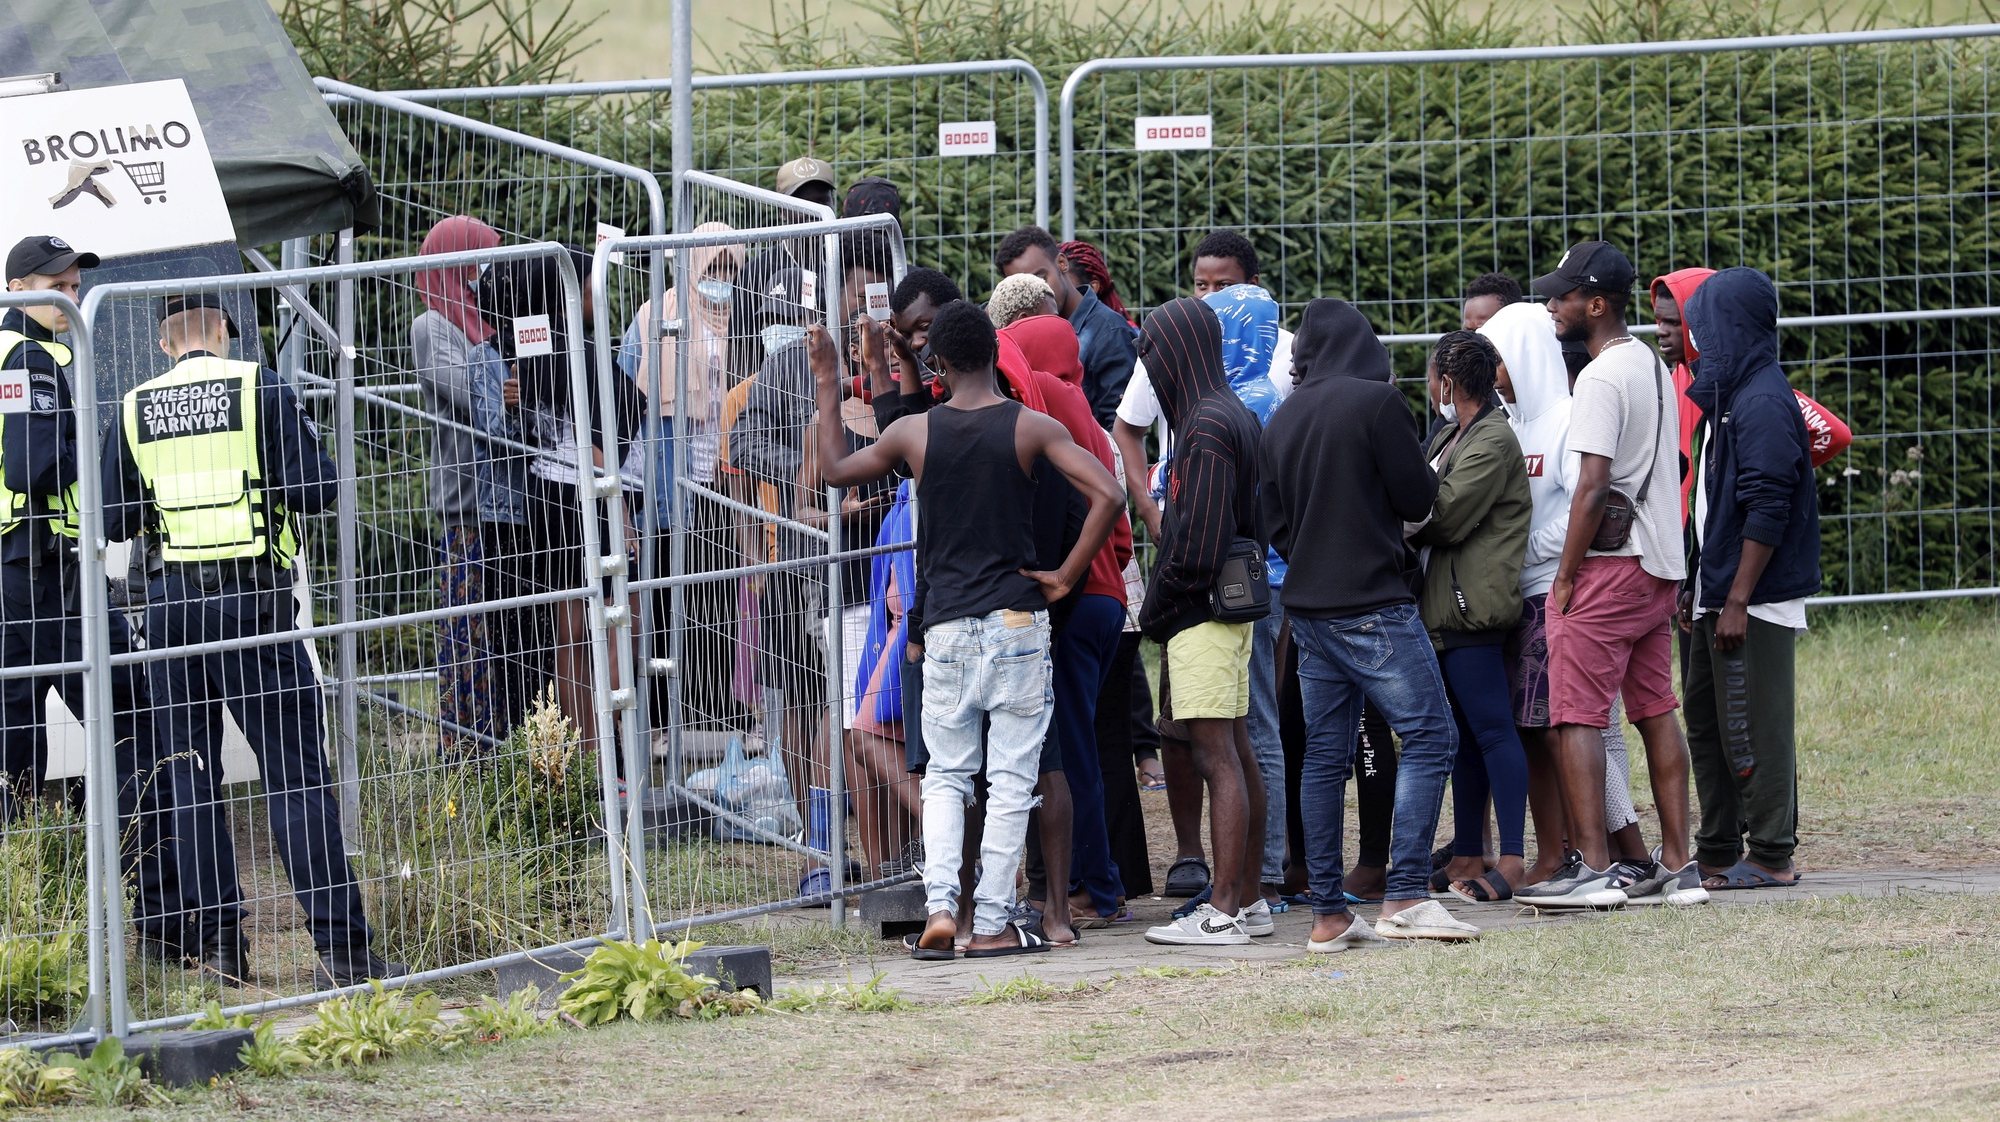 epa09388795 Detained migrants waiting in line for buying goods from an off-site store in a car at the migrant detention centre in Vydeniai, Lithuania, 02 August 2021. Some 3,800 migrants were detained in Lithuania in 2021 so far and officials have accused the Belarus regime to be behind an increased number of migrants crossing into Lithuania.  EPA/TOMS KALNINS